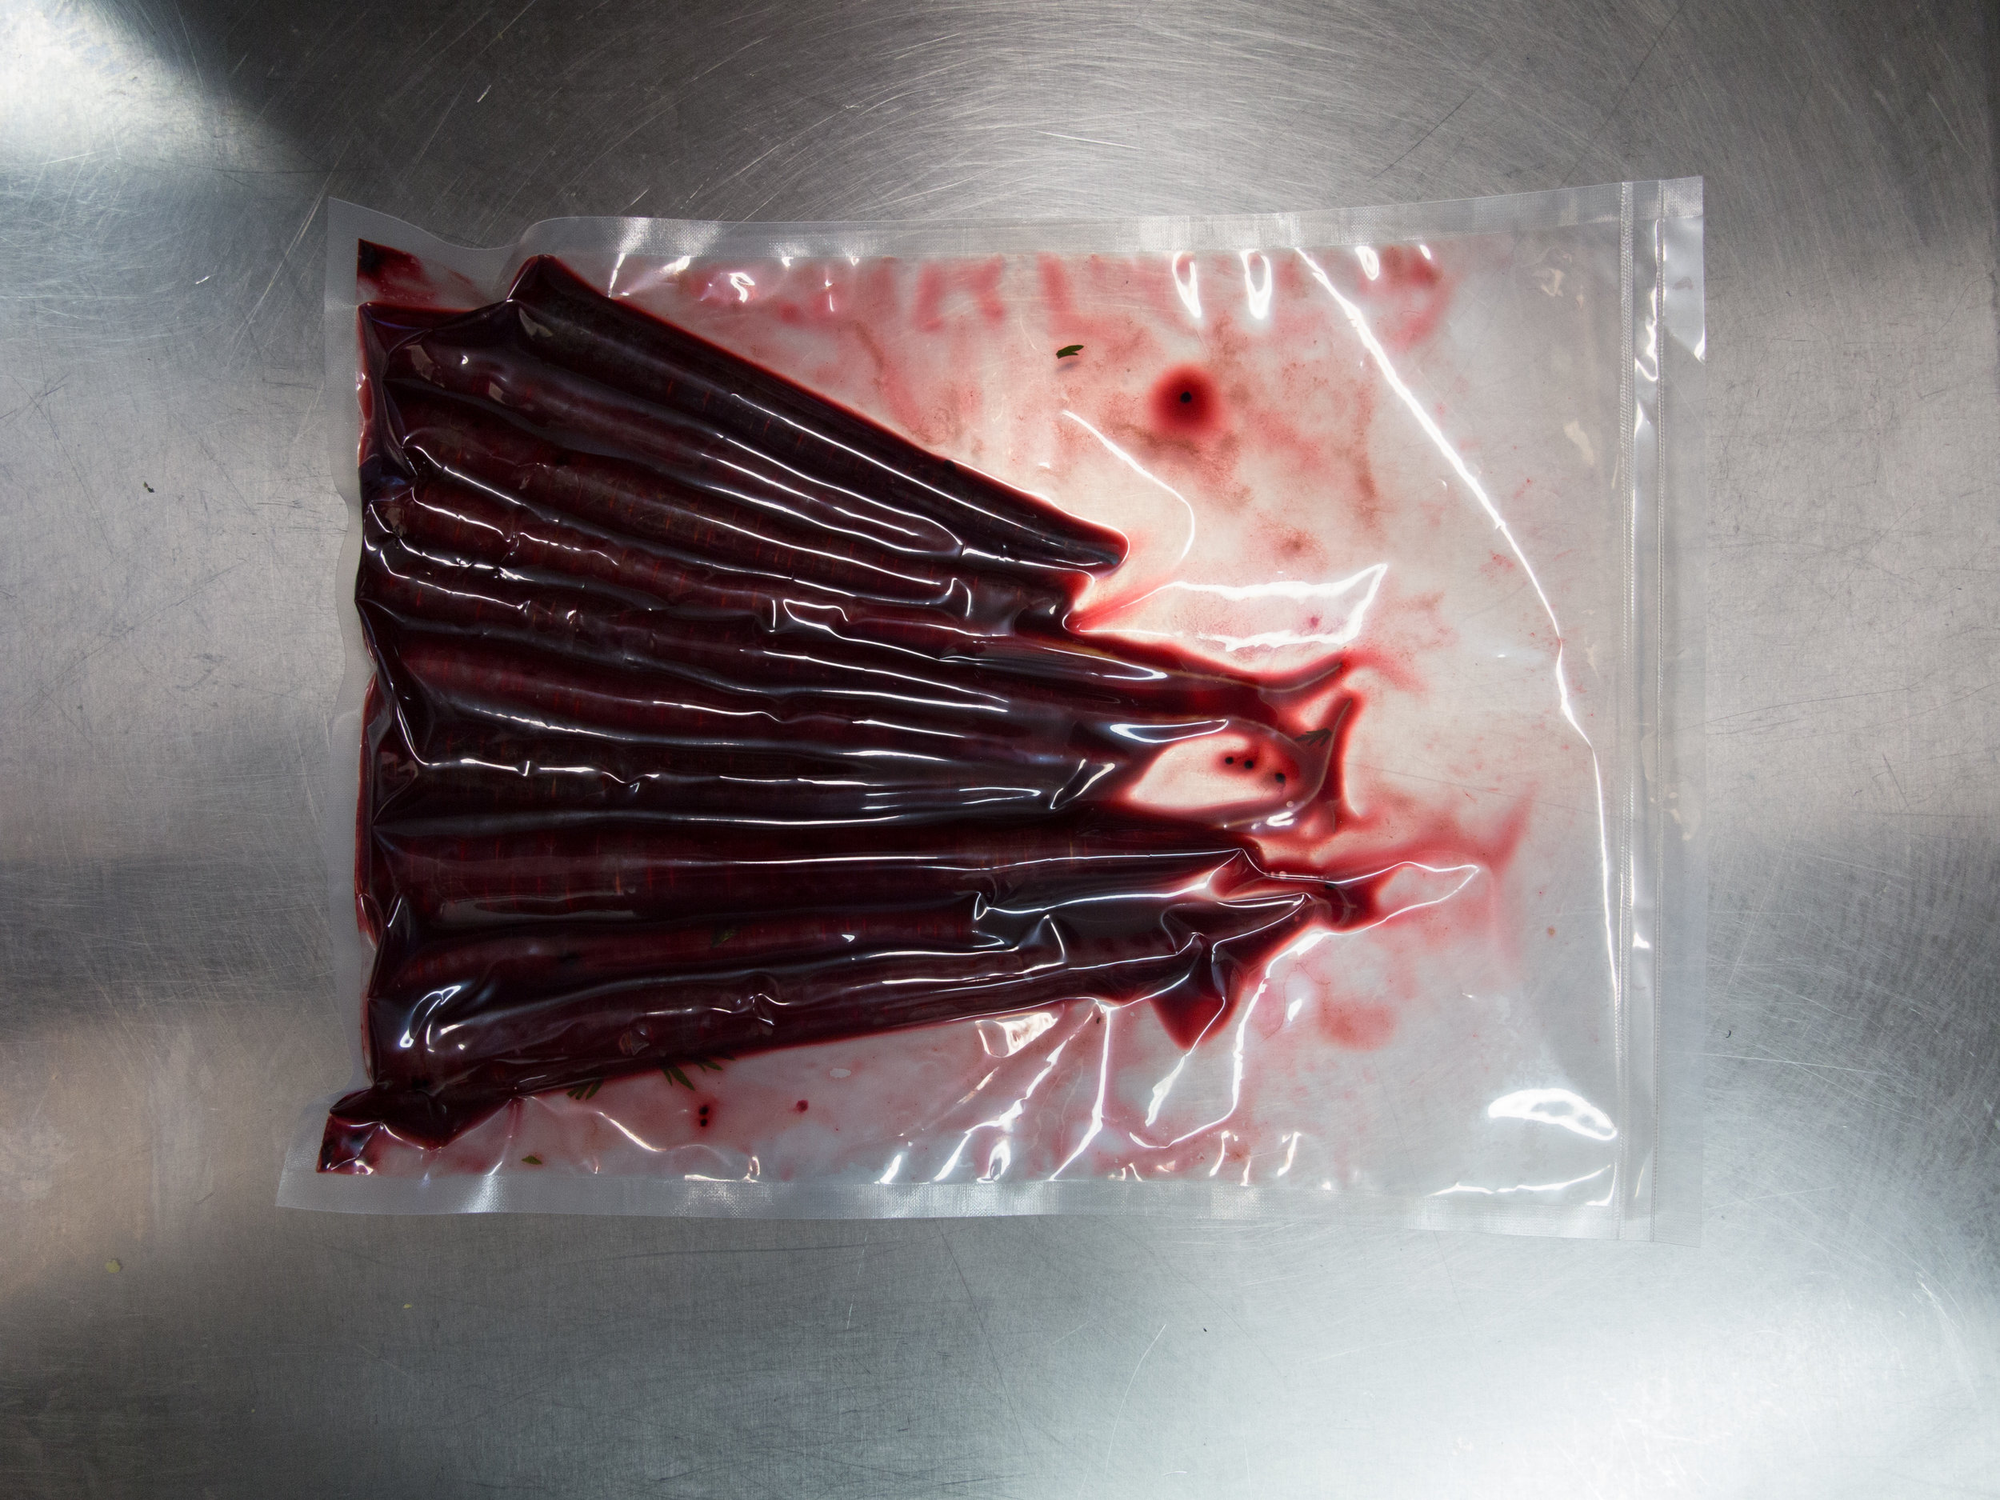 don't worry, these are carrots in beet juice